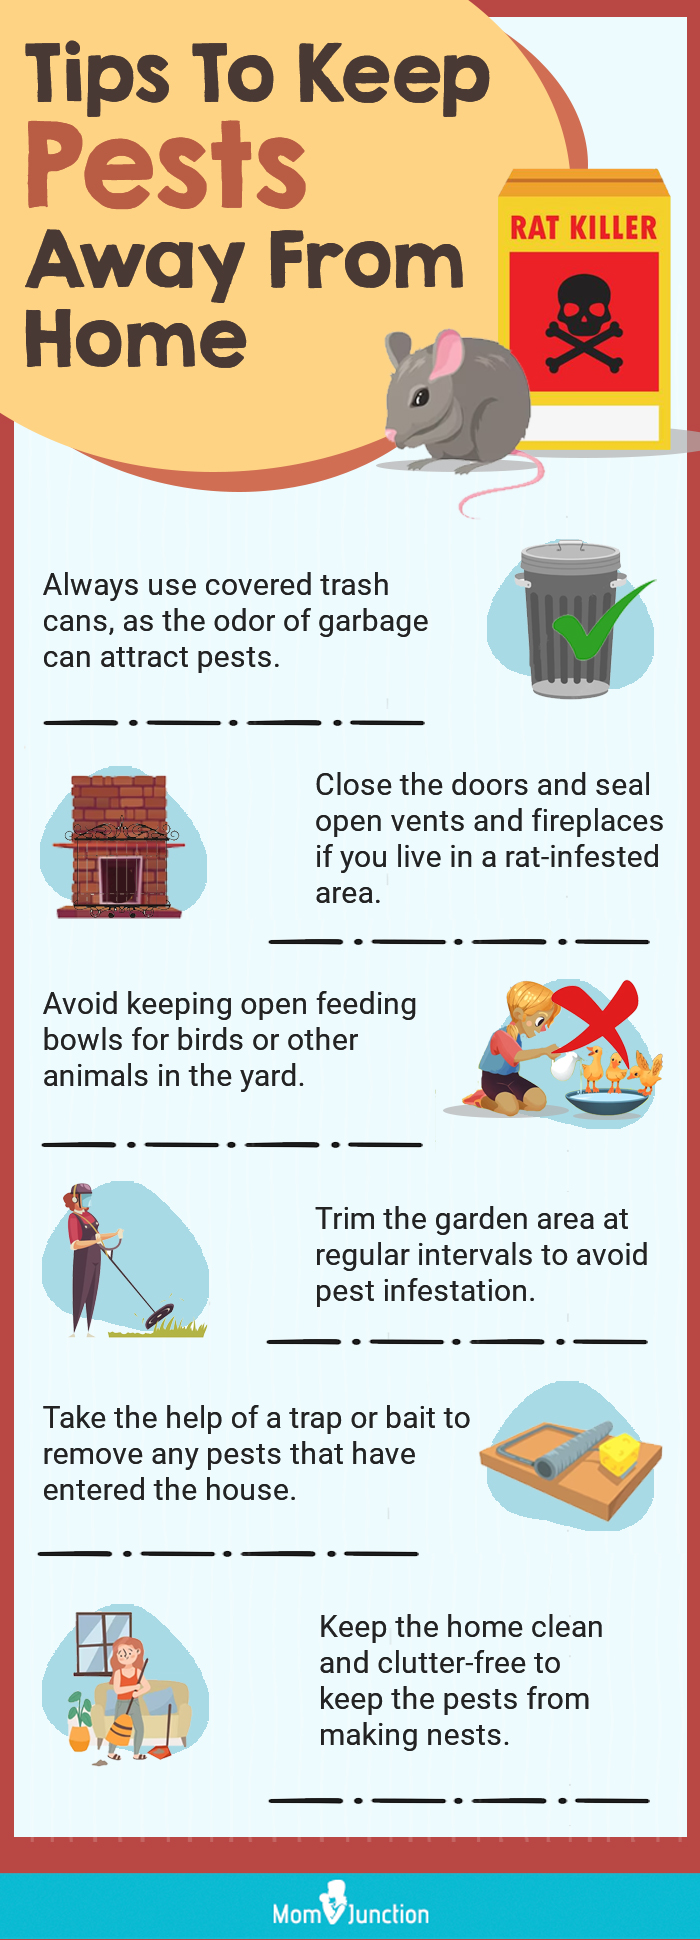 https://www.momjunction.com/wp-content/uploads/2021/02/Tips-To-Keep-Pests-Away-From-Home.jpg